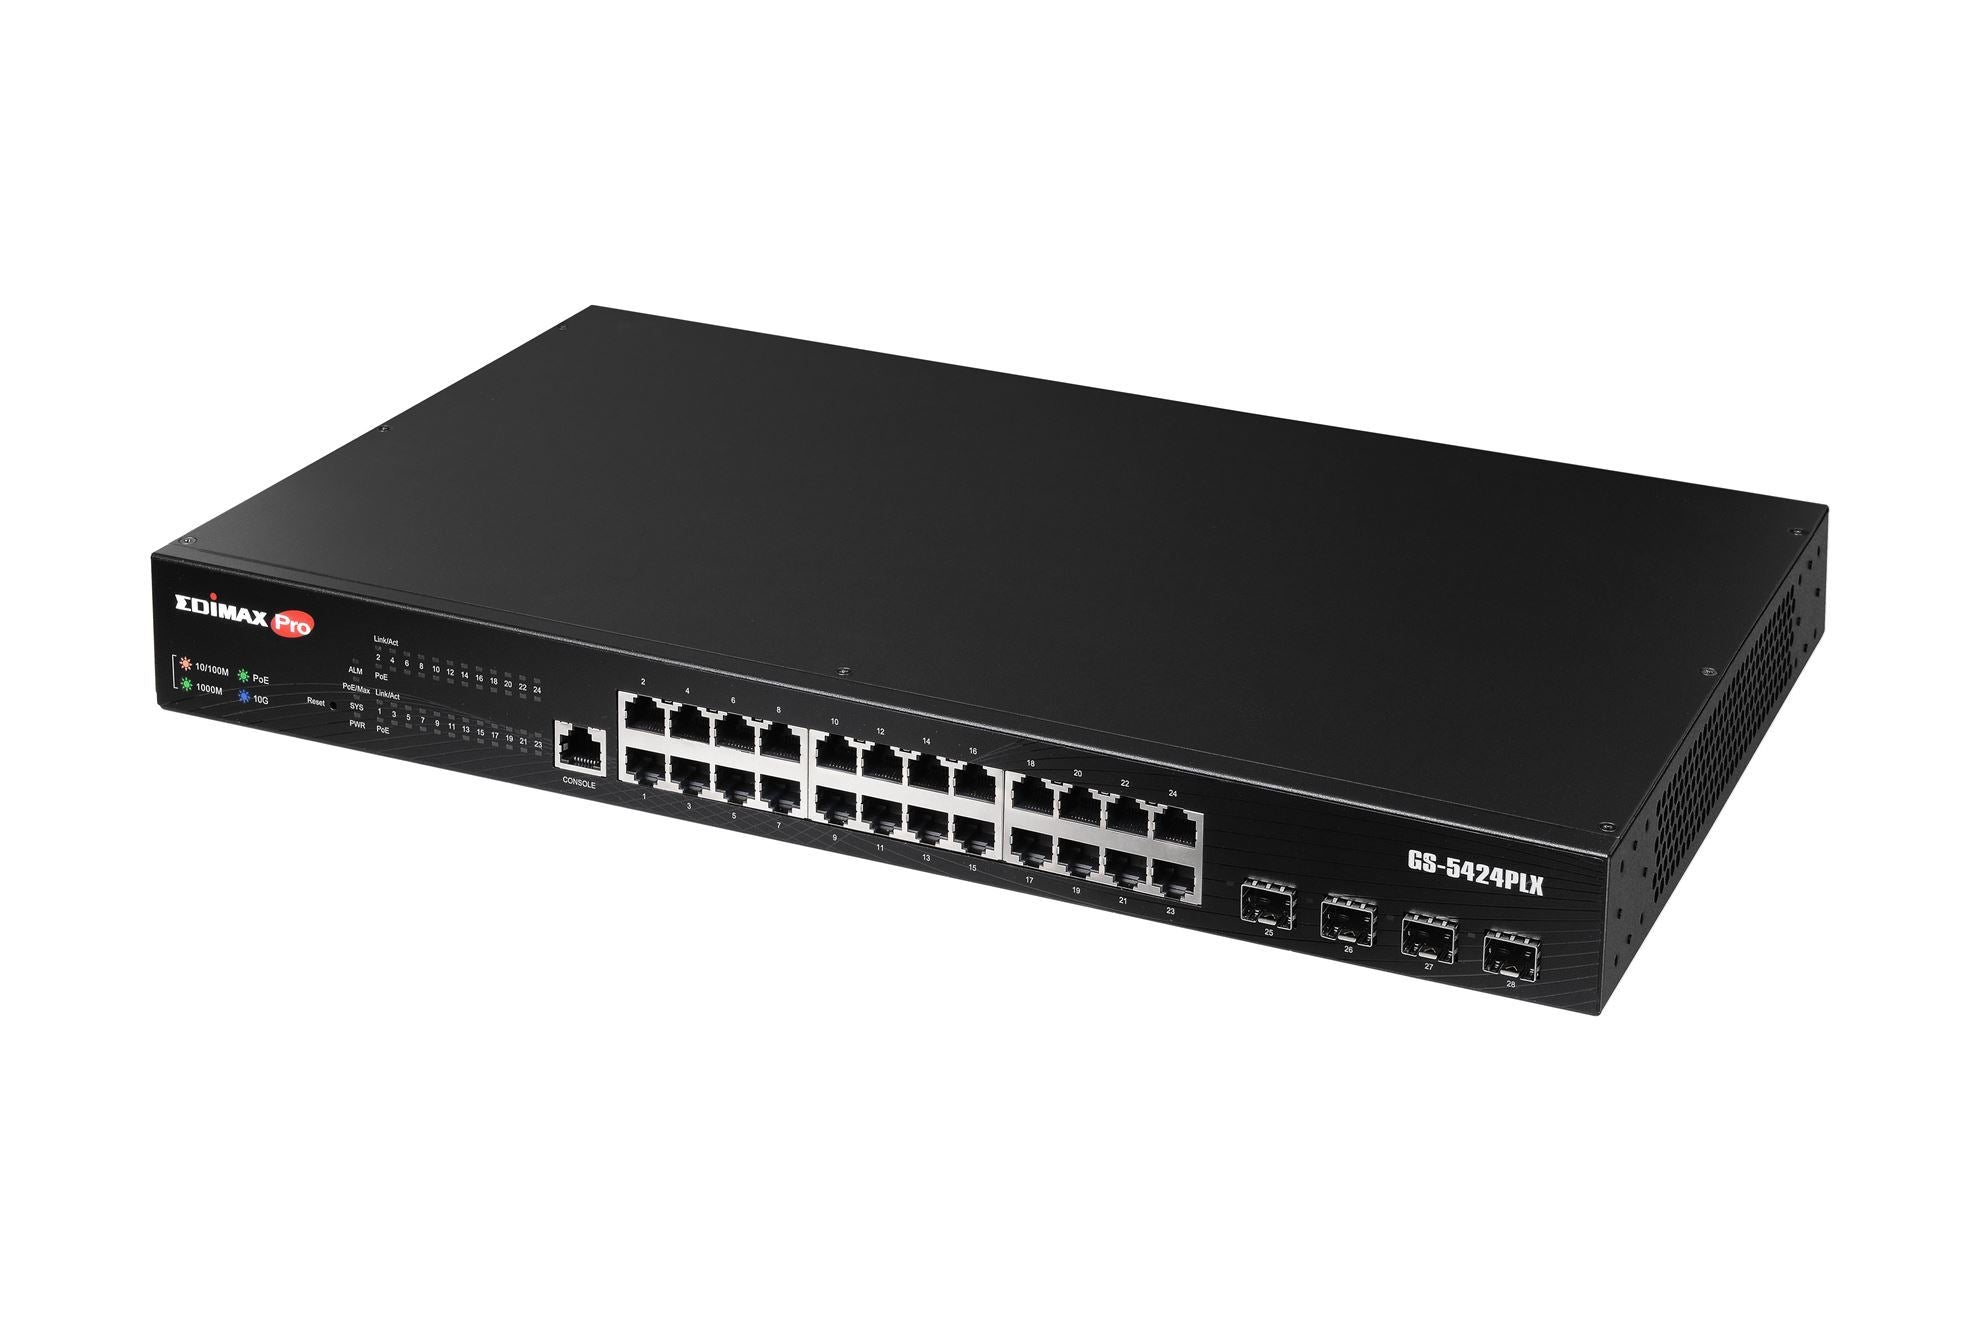 edimax 24 port gigabit poe+ web smart surveillance switch with 4 port 10gbe sfp+ uplinks. compliant with onvif. supports up to 30w per poe port (total power budget: 400w) long range up to 200m at 10mbps.  tech supply shed